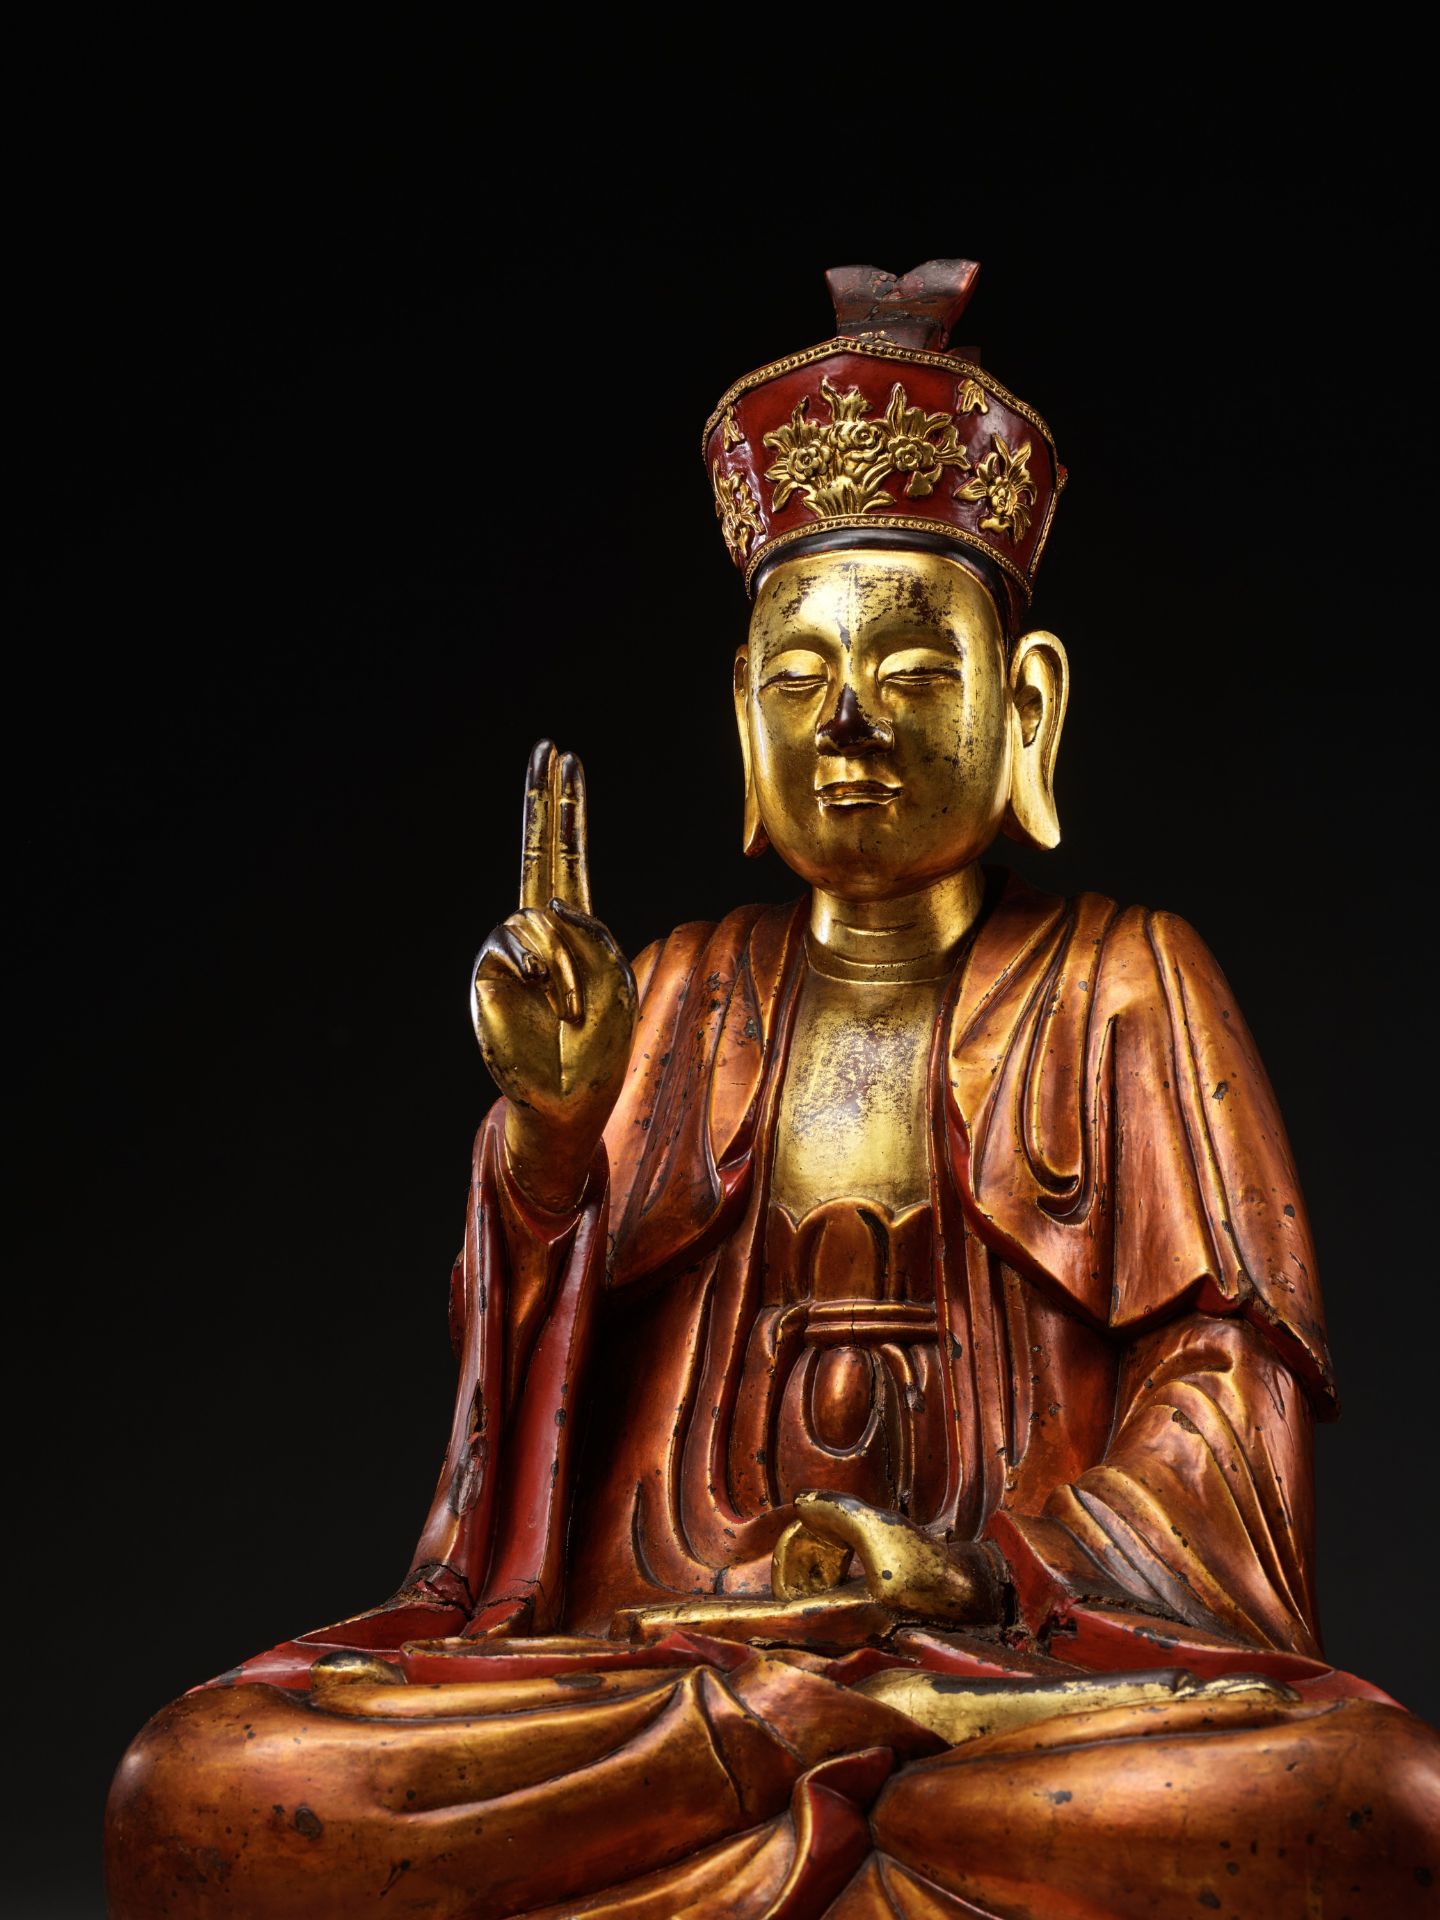 A LARGE GILT-LACQUERED WOOD FIGURE OF A BODHISATTVA, VIETNAM, 17TH-18TH CENTURY - Image 11 of 14